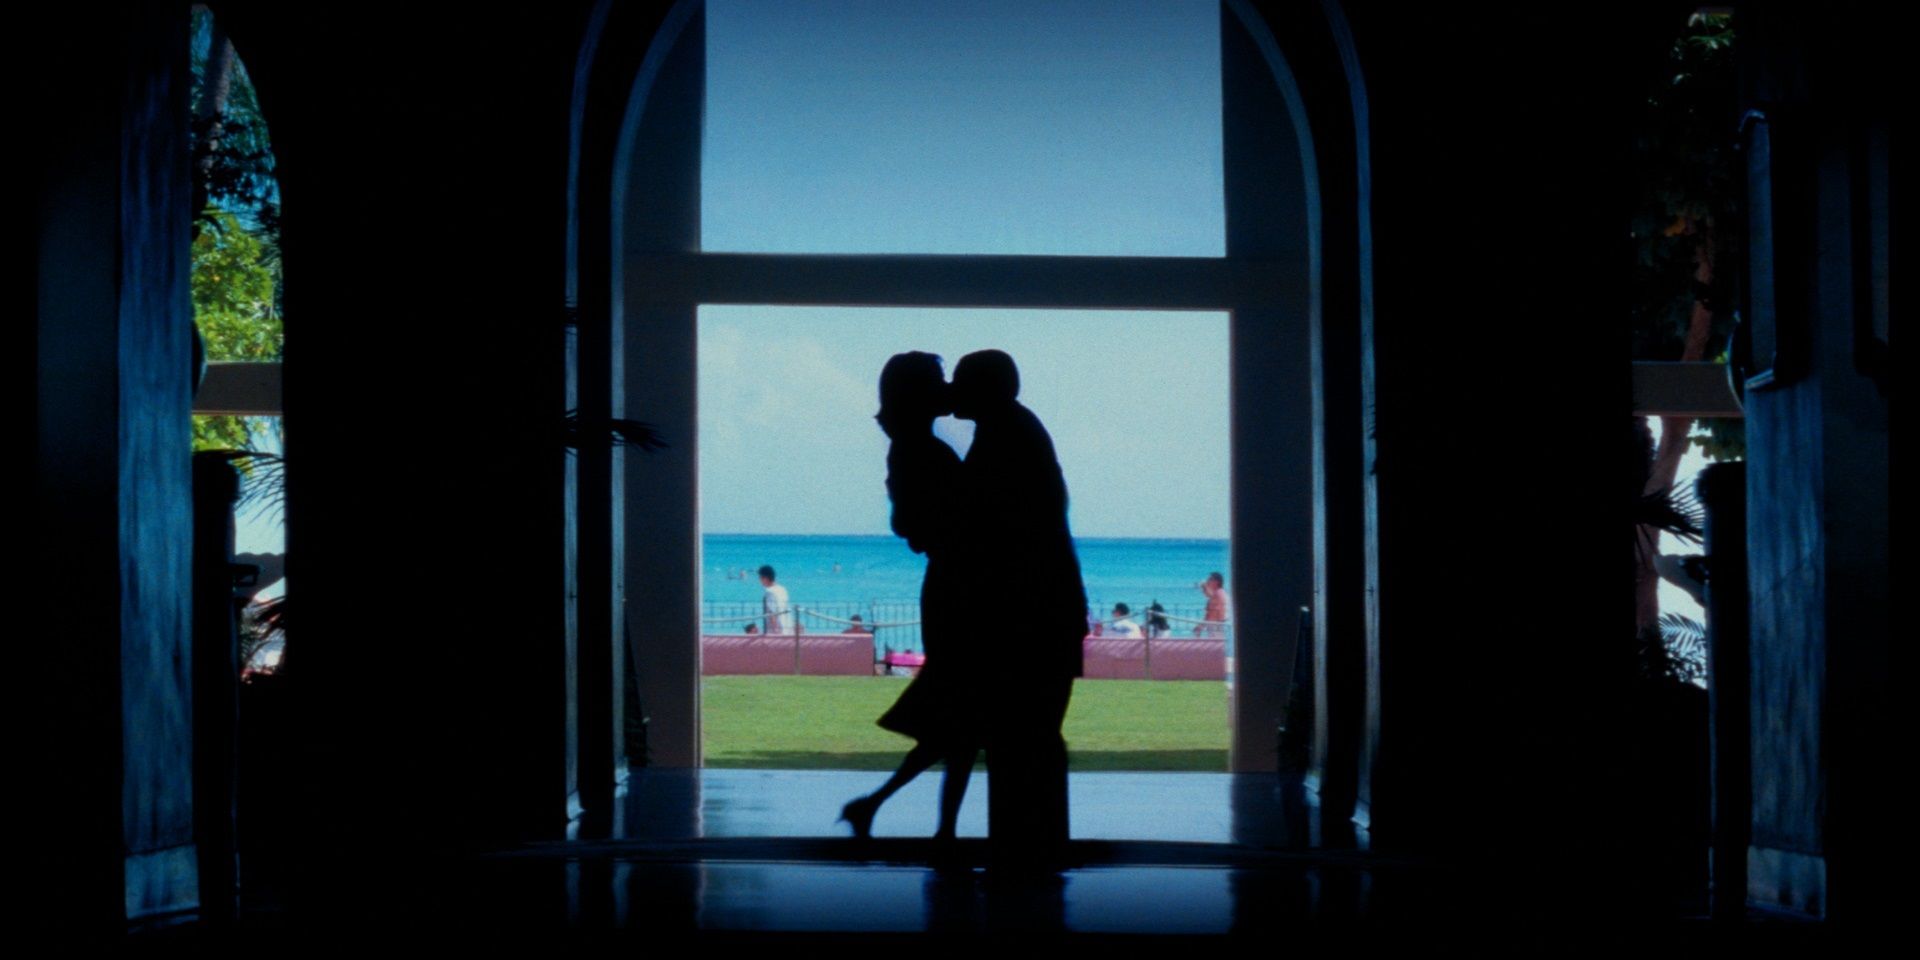 Barry and Lena embrace in silhouette in Punch-Drunk Love